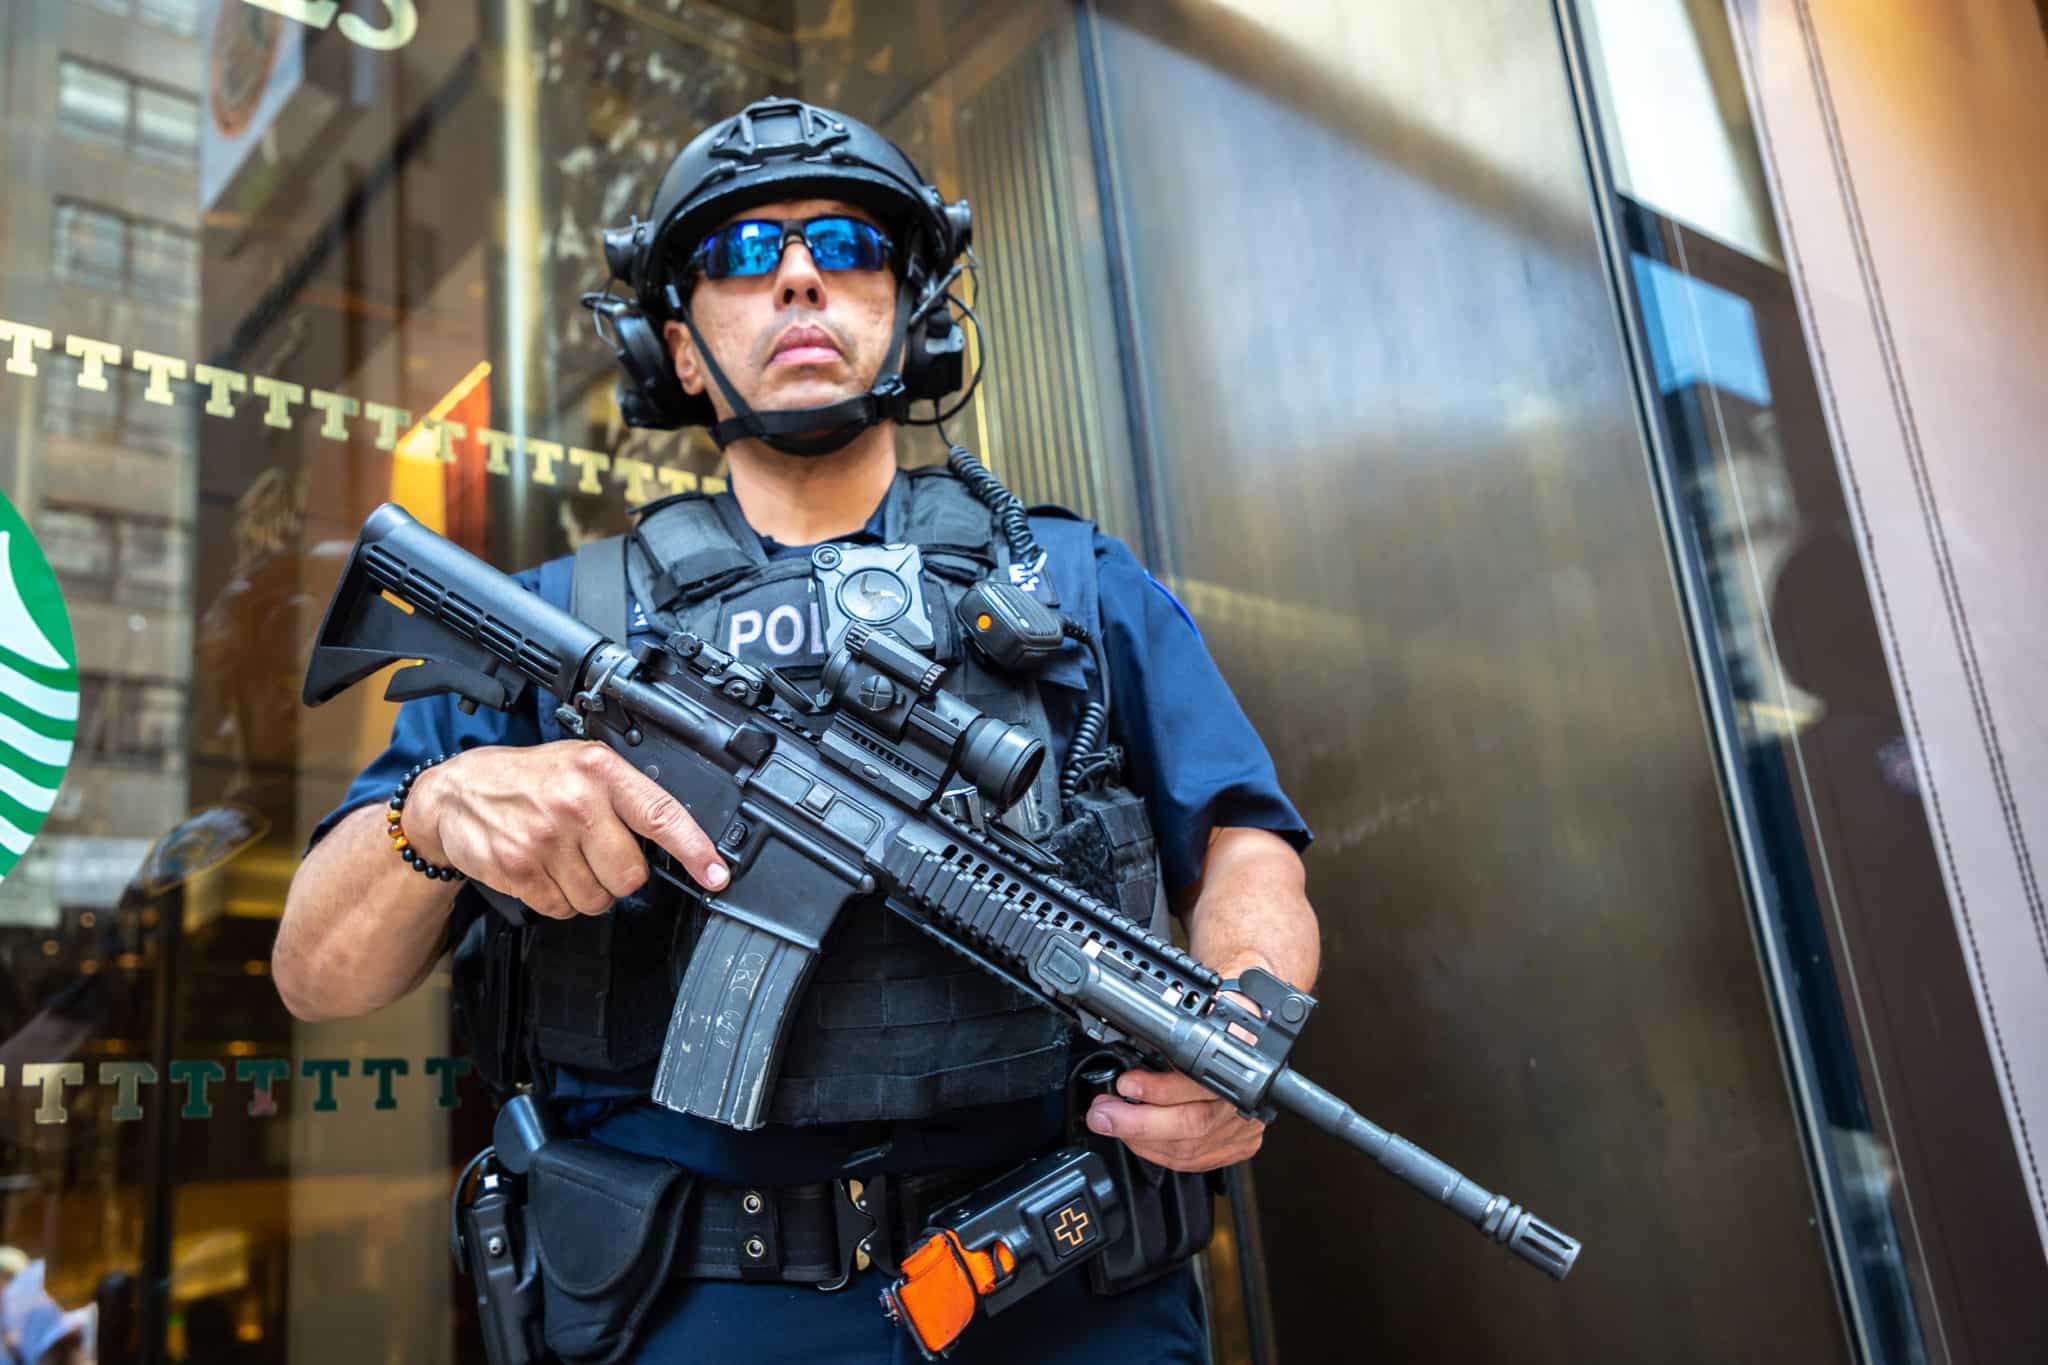 NYC Police standing guard in New York